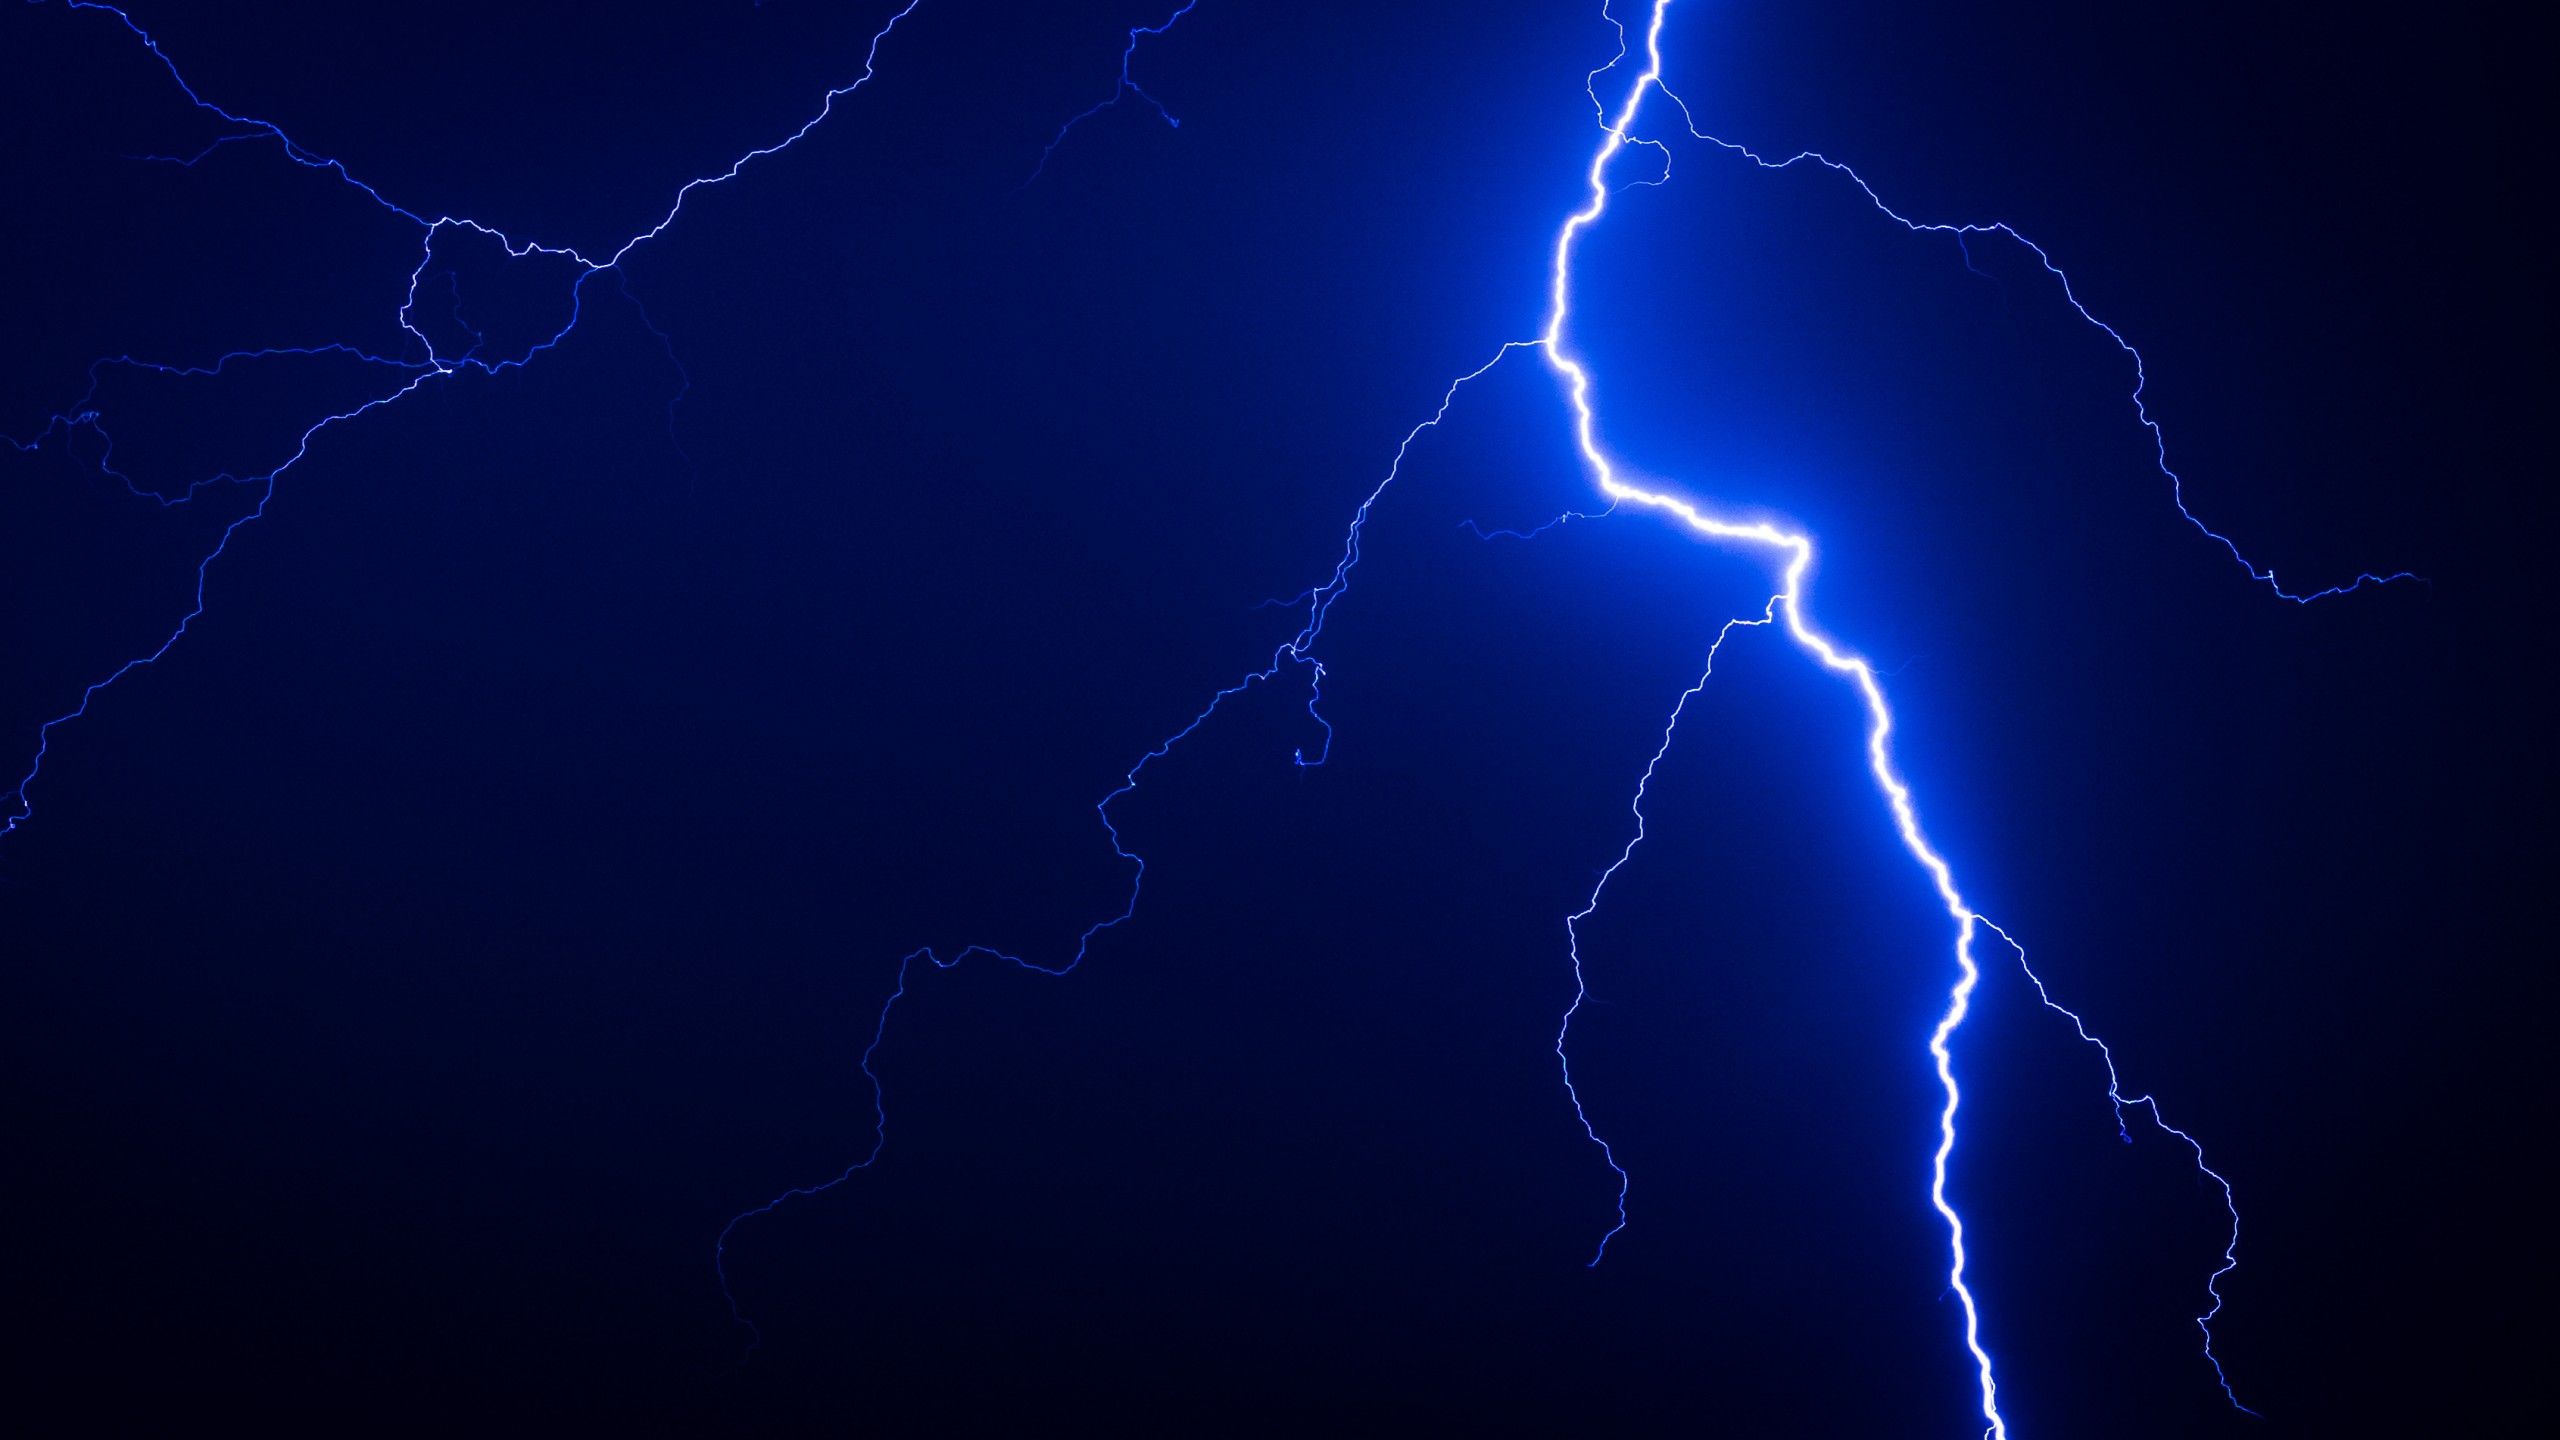 Wallpaper Lightning, Thunderstorm, Blue, Night, 4K, Photography,. Wallpaper for iPhone, Android, Mobile and Desktop